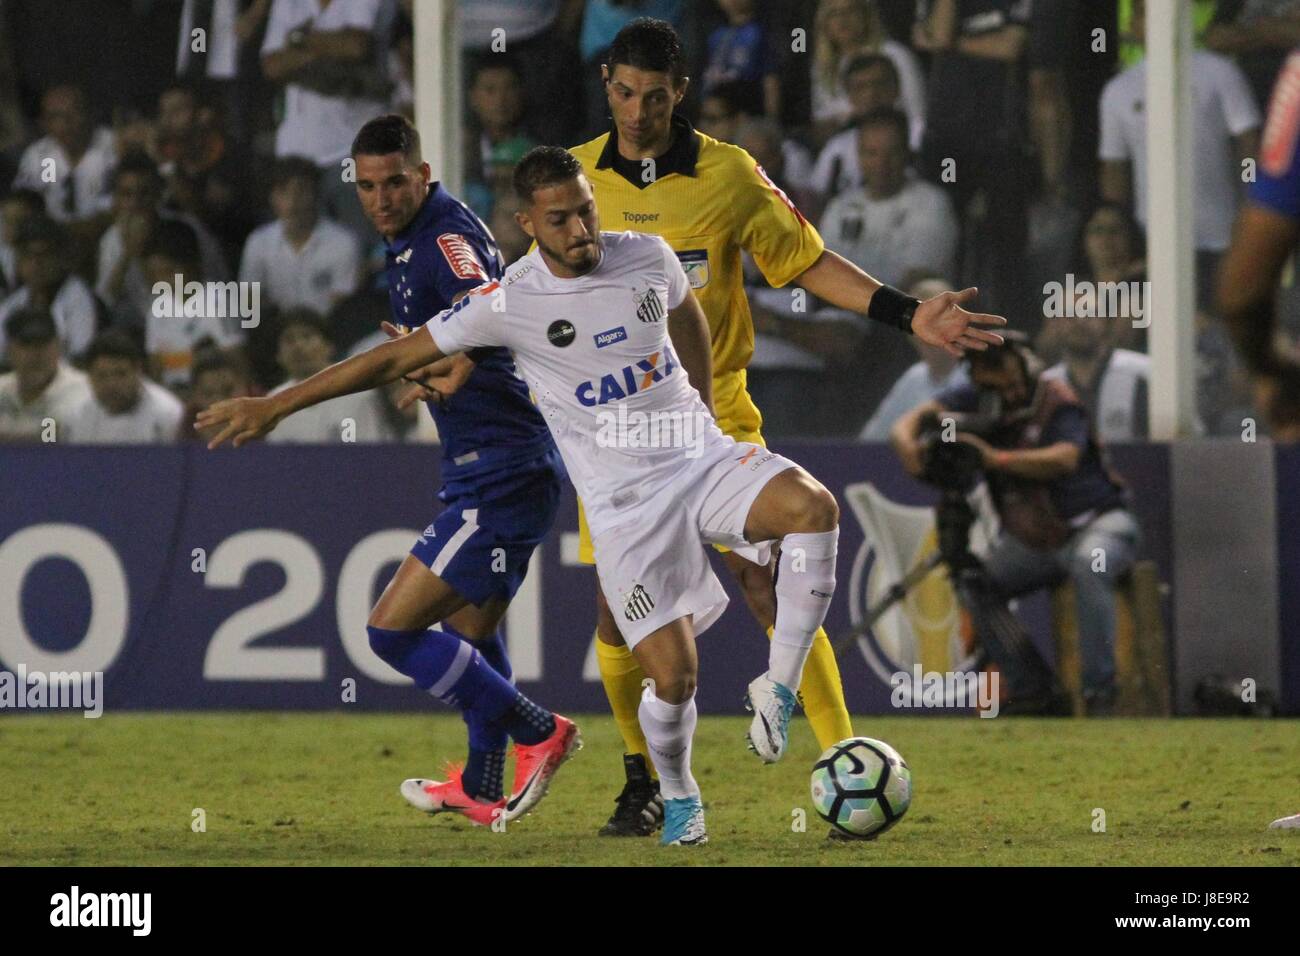 Santos, Brazil. 28th May, 2017. Jean Motta and Thiago Neves during the match between Santos and Cruzeiro held at Estadio Urbano Caldeira, Vila Belmiro in Santos. The match is valid for the 3rd round of the 2017 Brazilian Championship. Credit: Ricardo Moreira/FotoArena/Alamy Live News Stock Photo